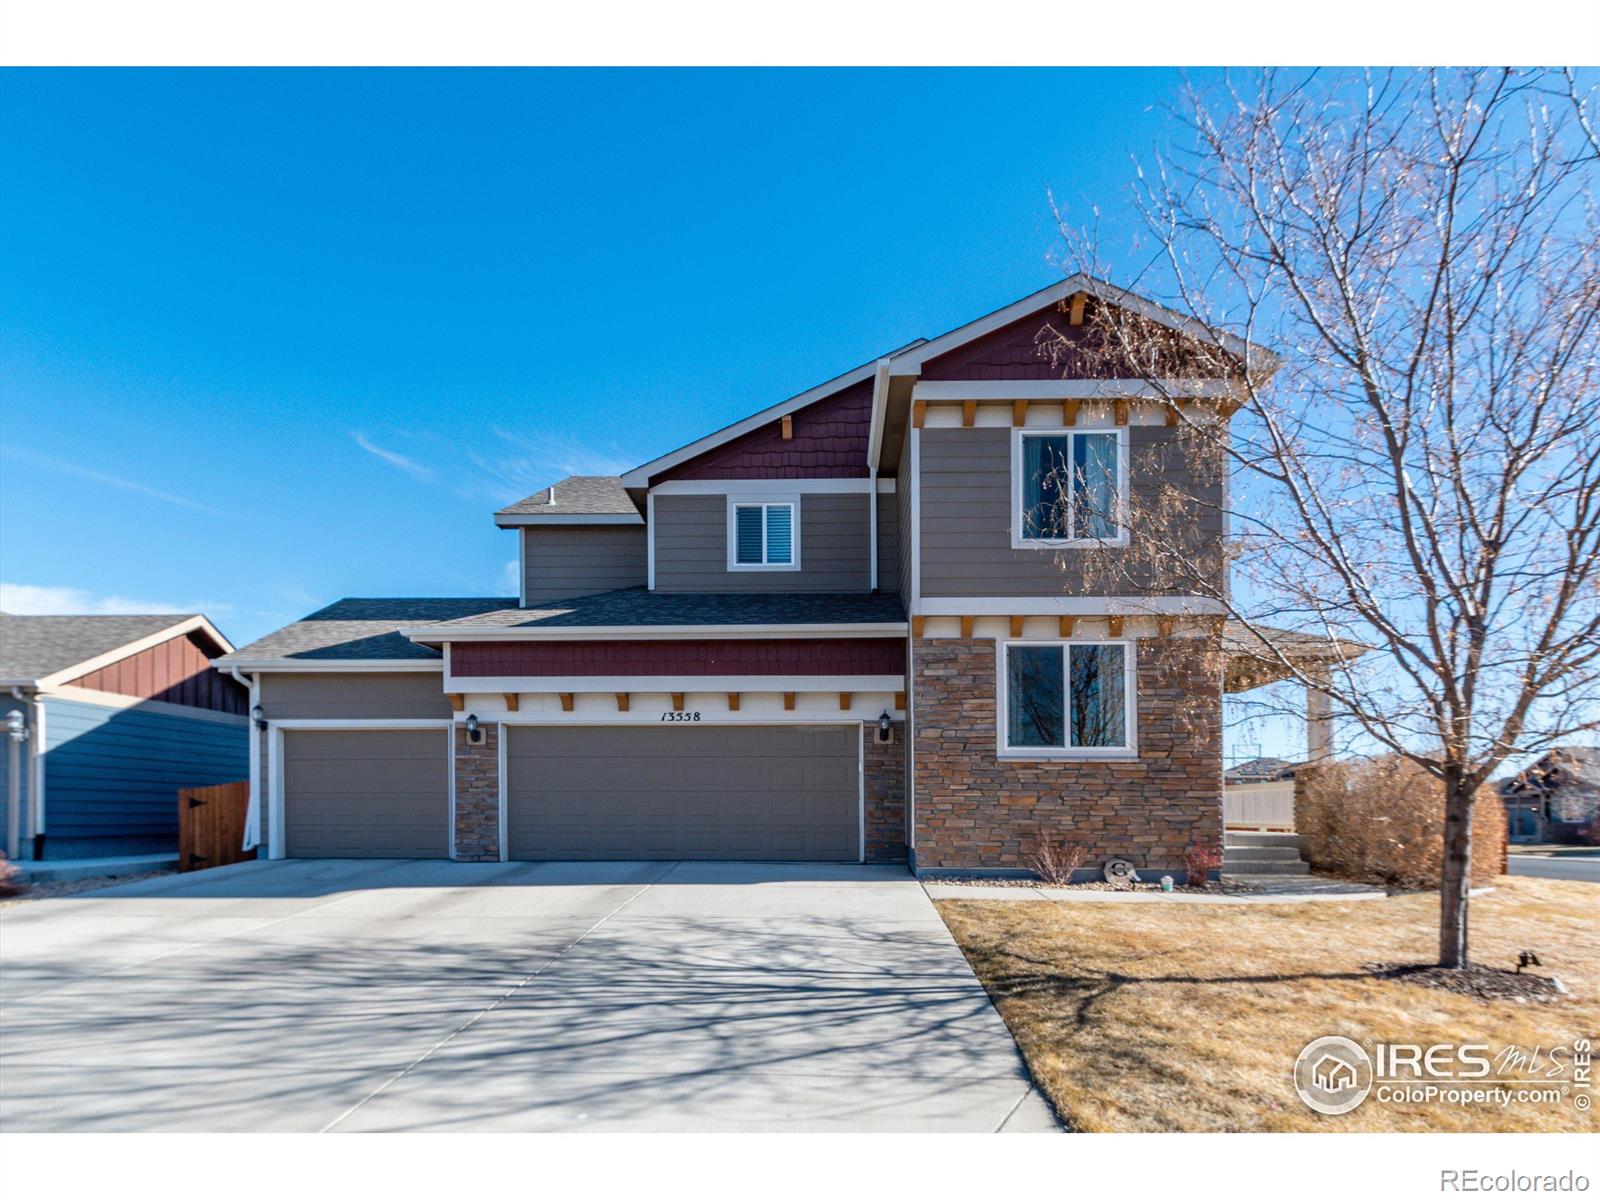 Report Image for 13558  Horseshoe Circle,Mead, Colorado